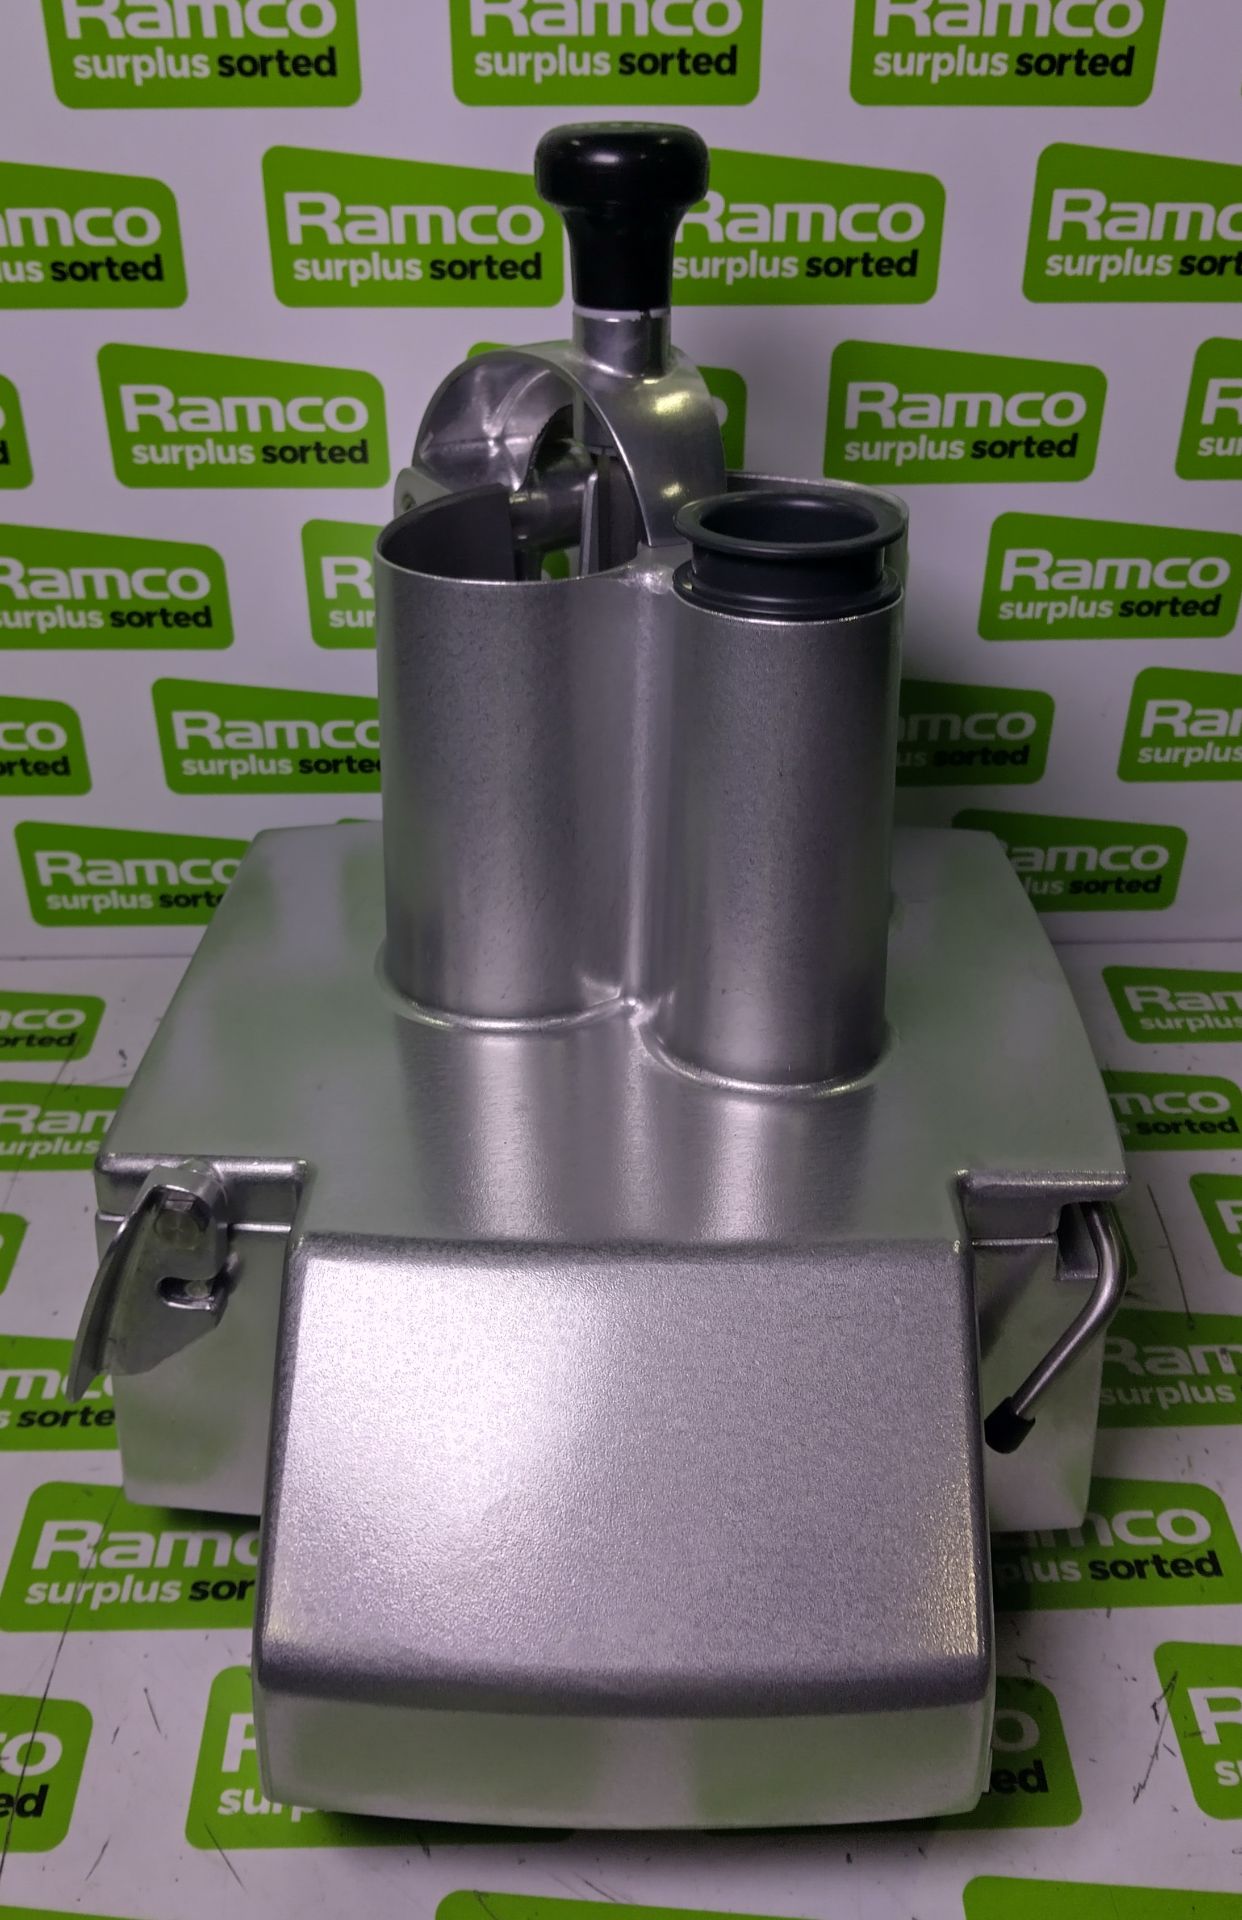 Robot-Coupe R 502 - food processor with stainless steel cutter bowl and slicing attachment - 440V - Image 3 of 6